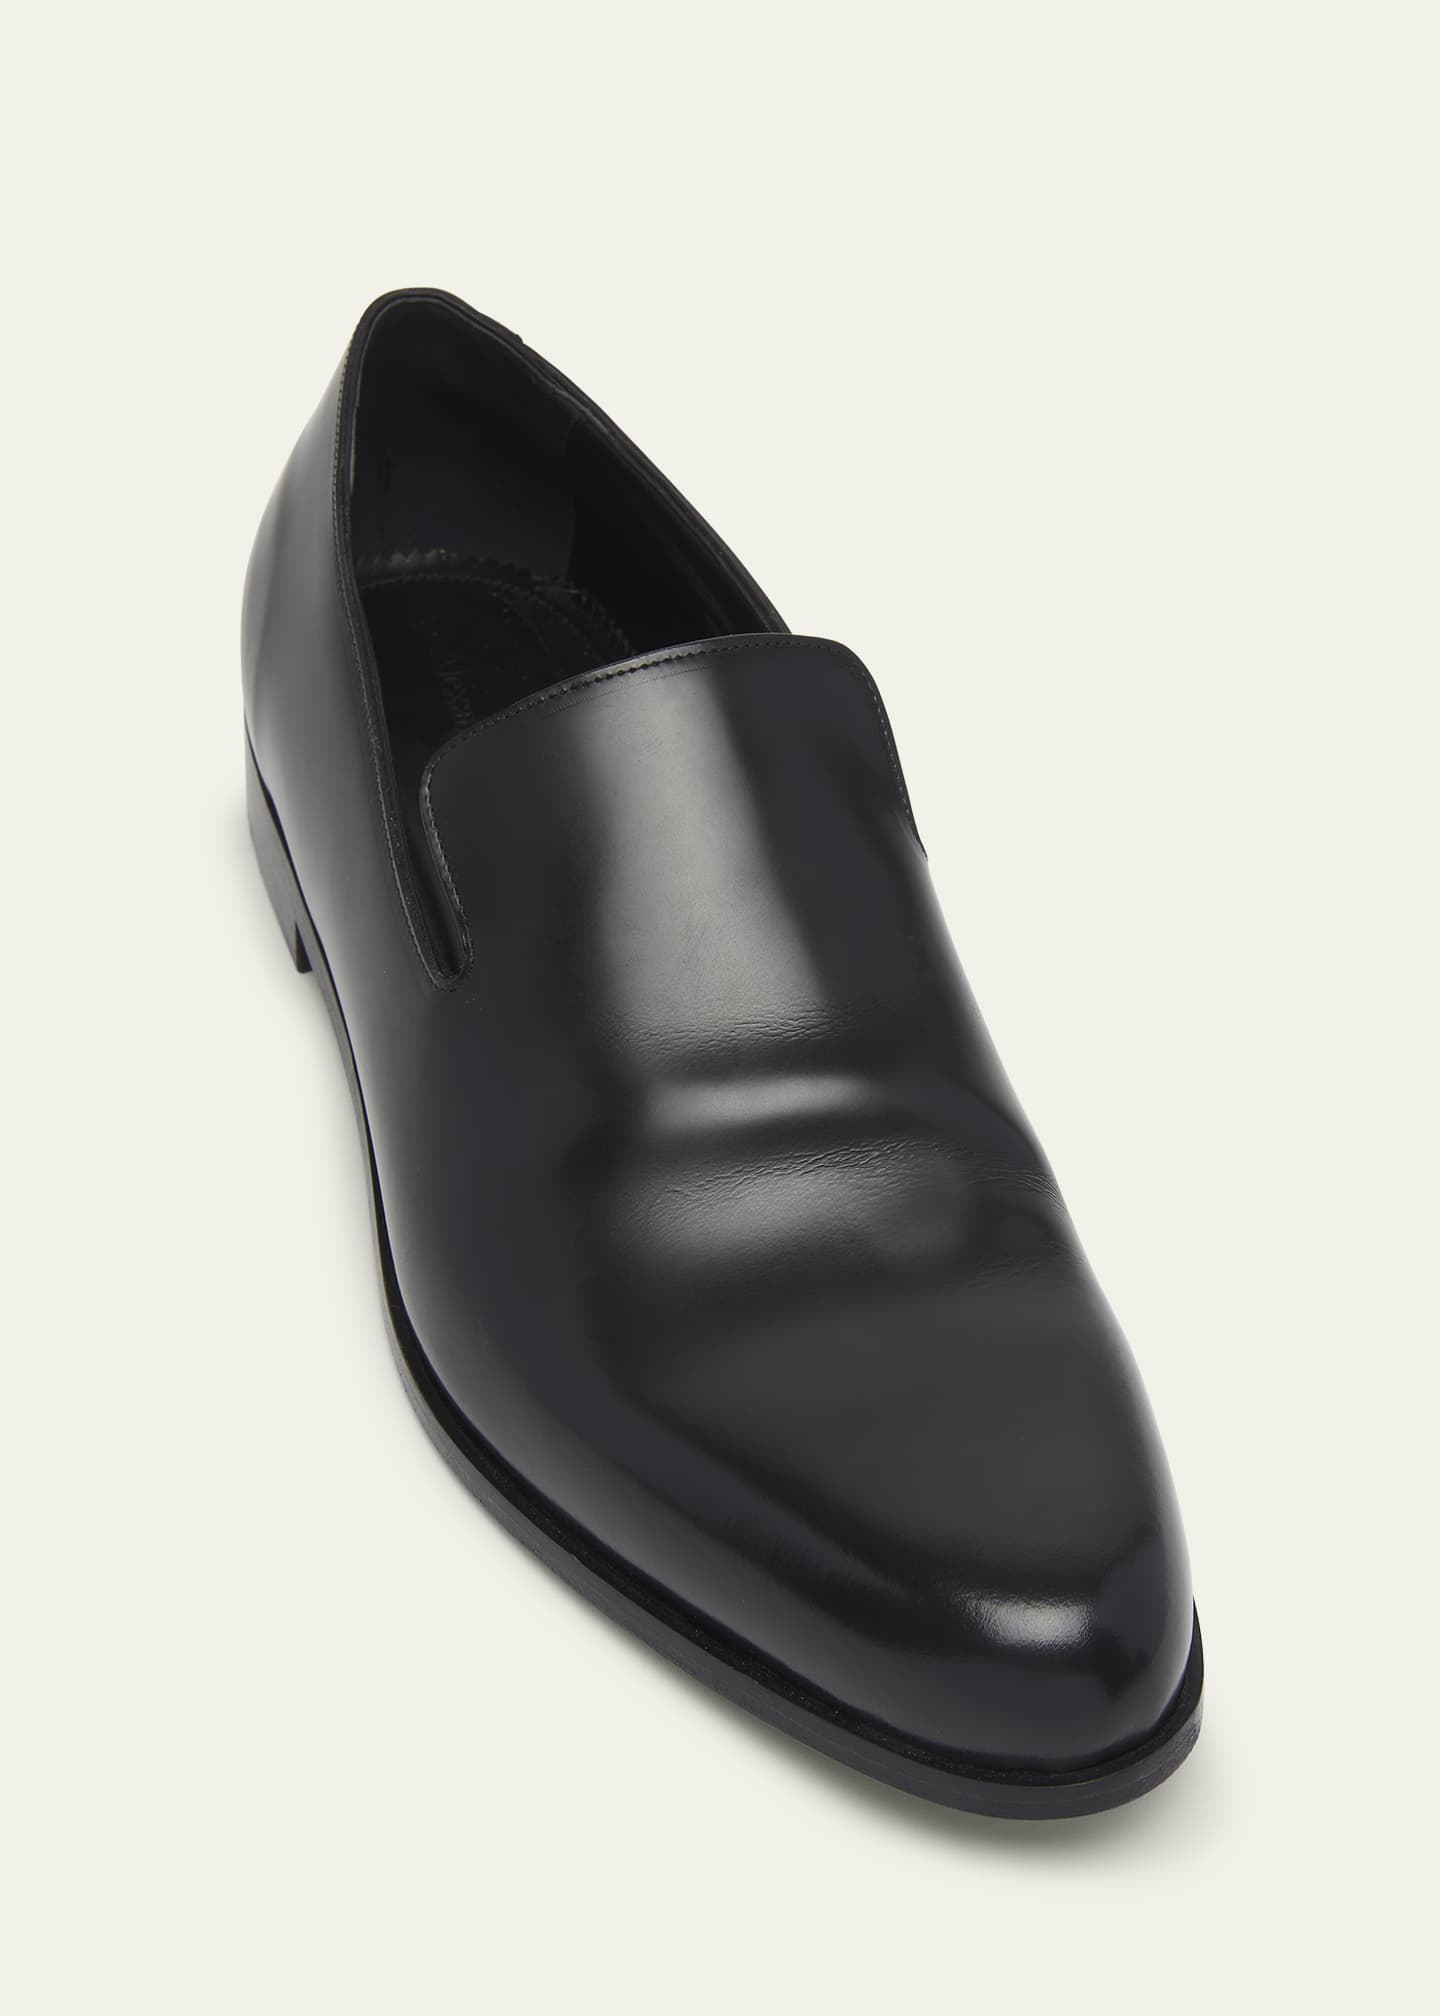 ALEXANDER MCQUEEN - Leather Loafers